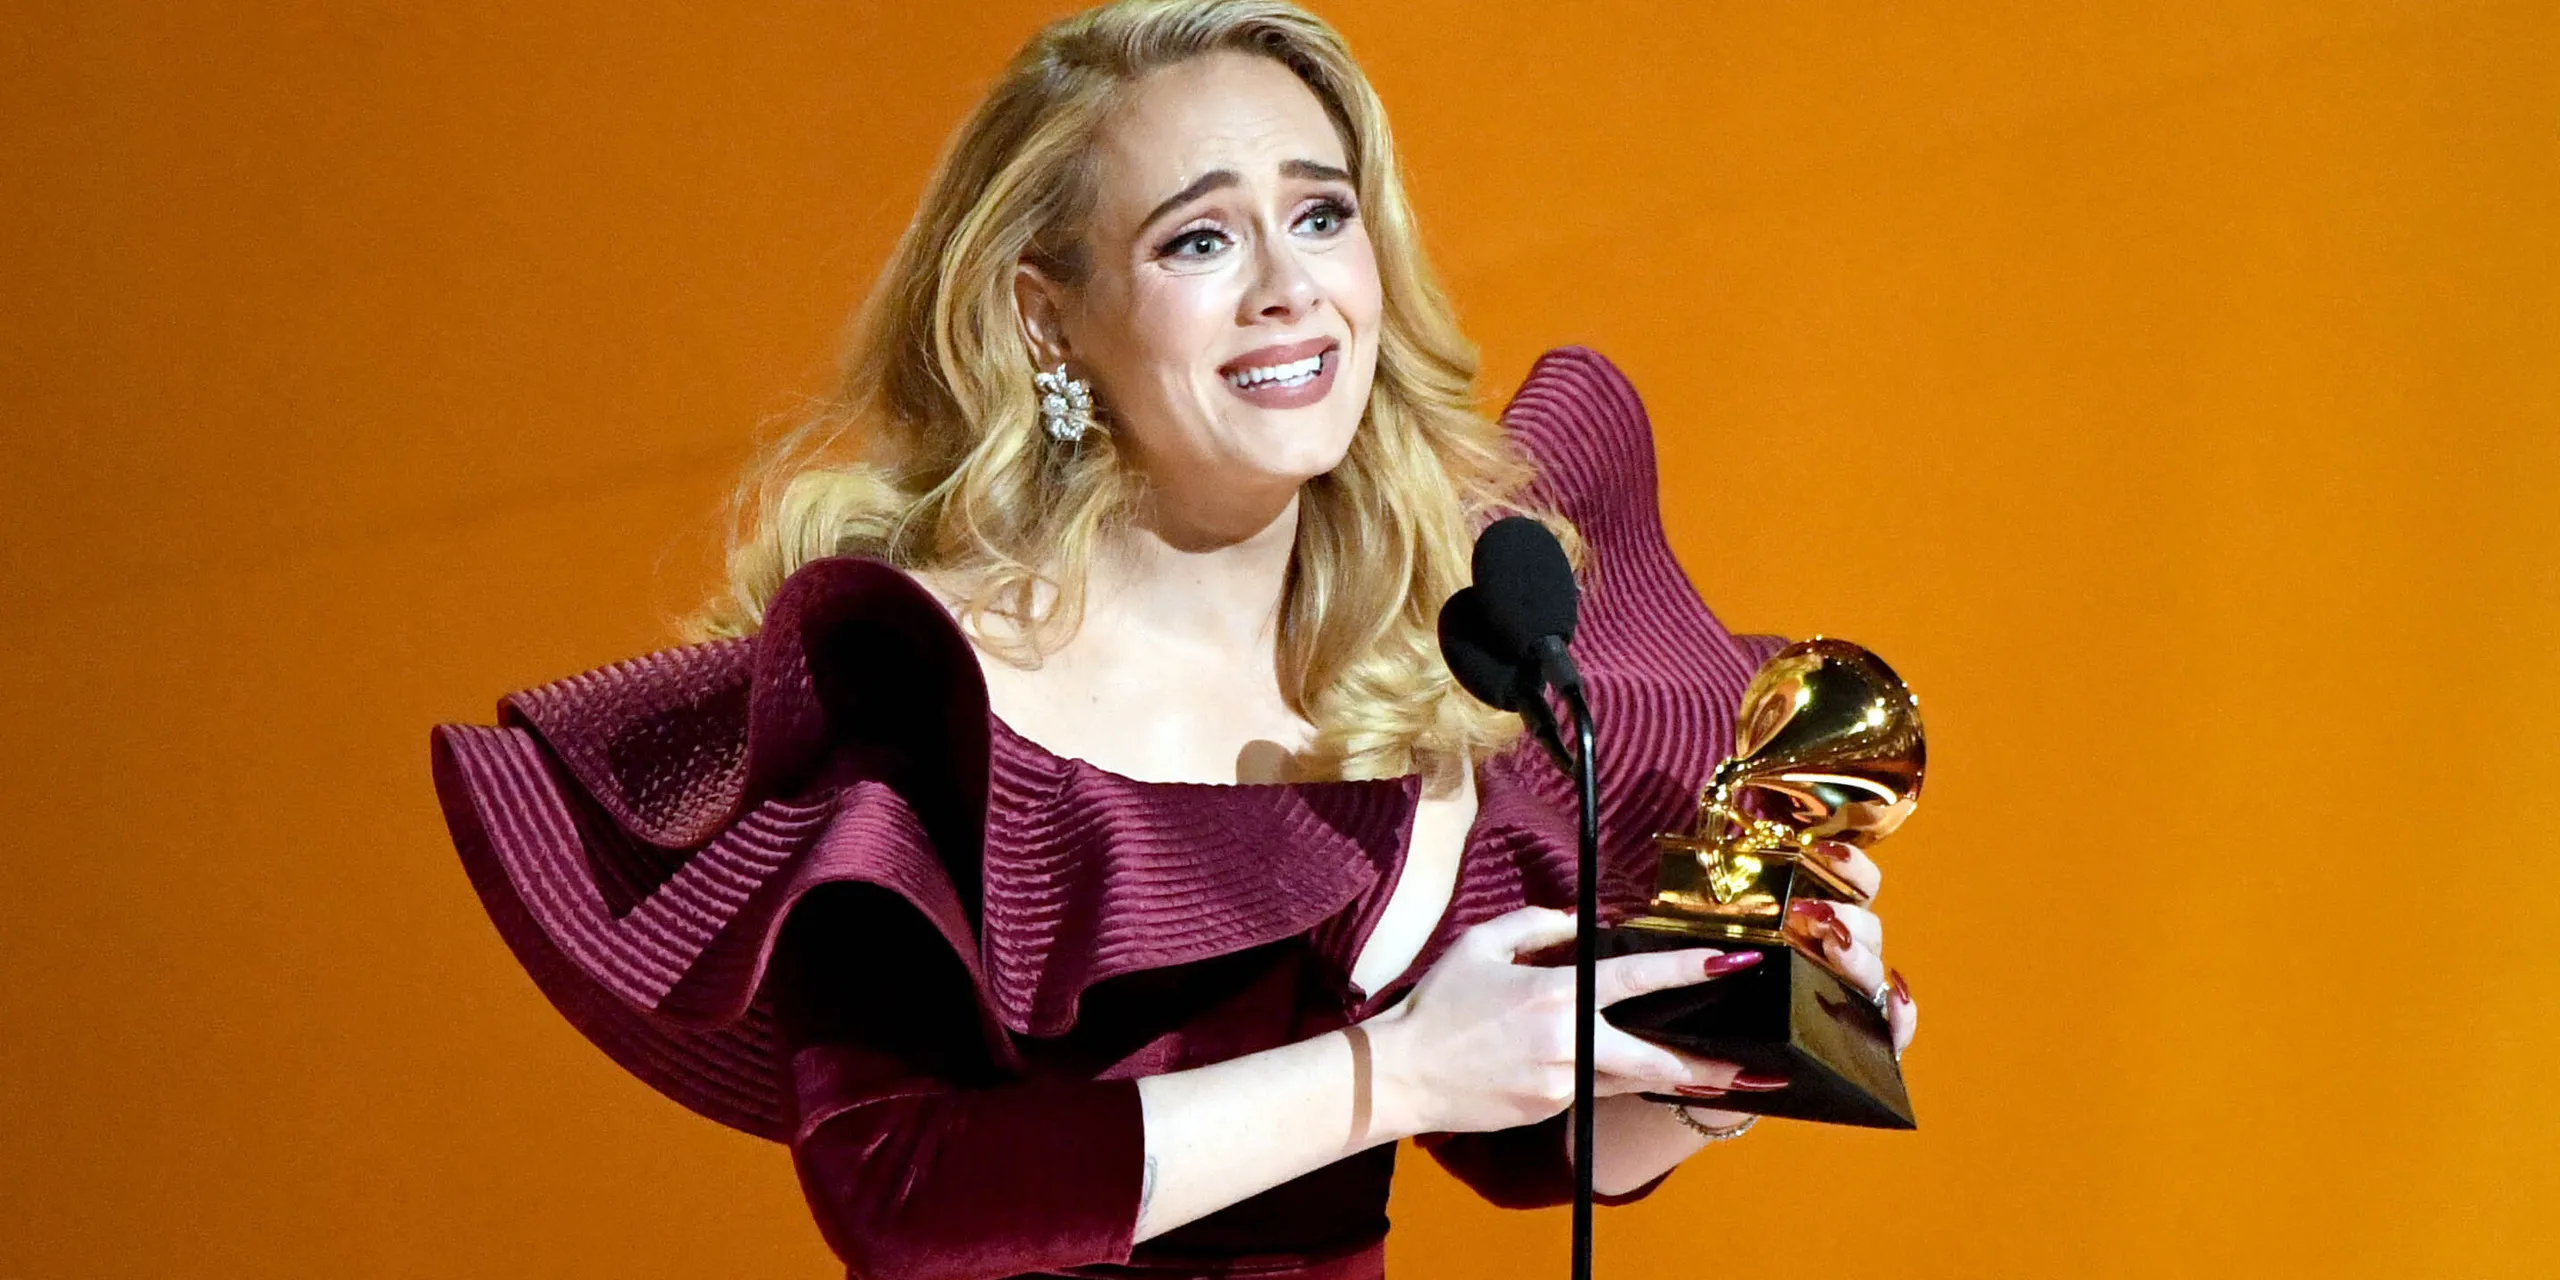 Adele Makes Stylish Return to the Grammys in Romantic Ruby Gown and Dazzling Diamonds